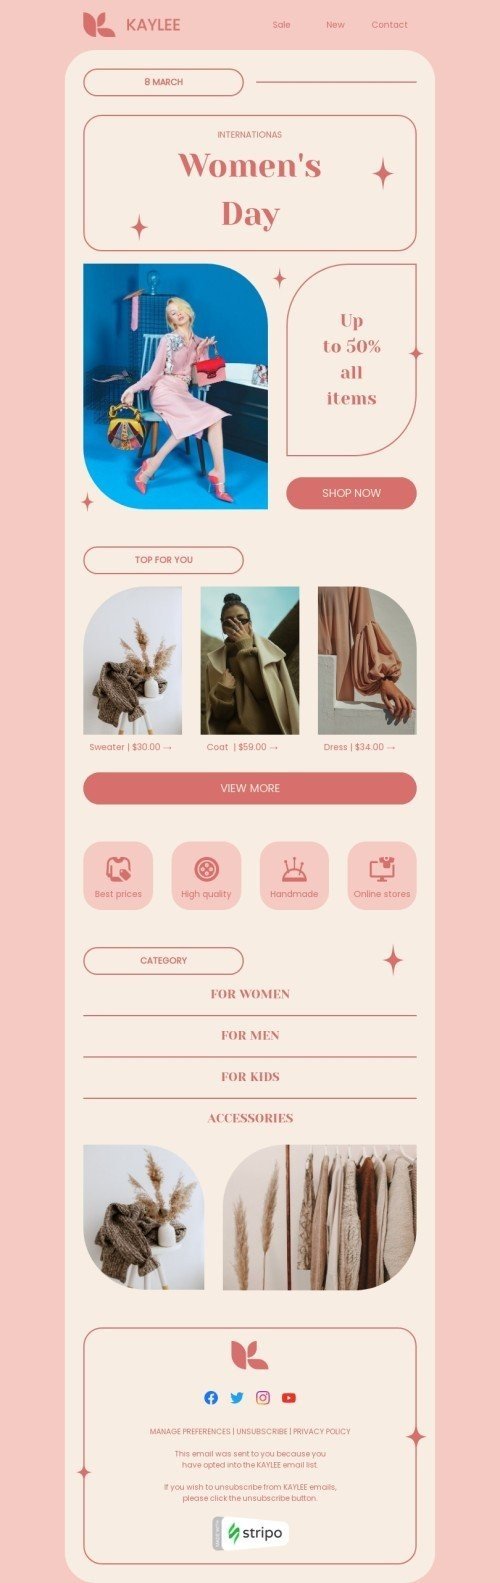 Women's Day email template "Pink Women's Day" for fashion industry desktop view